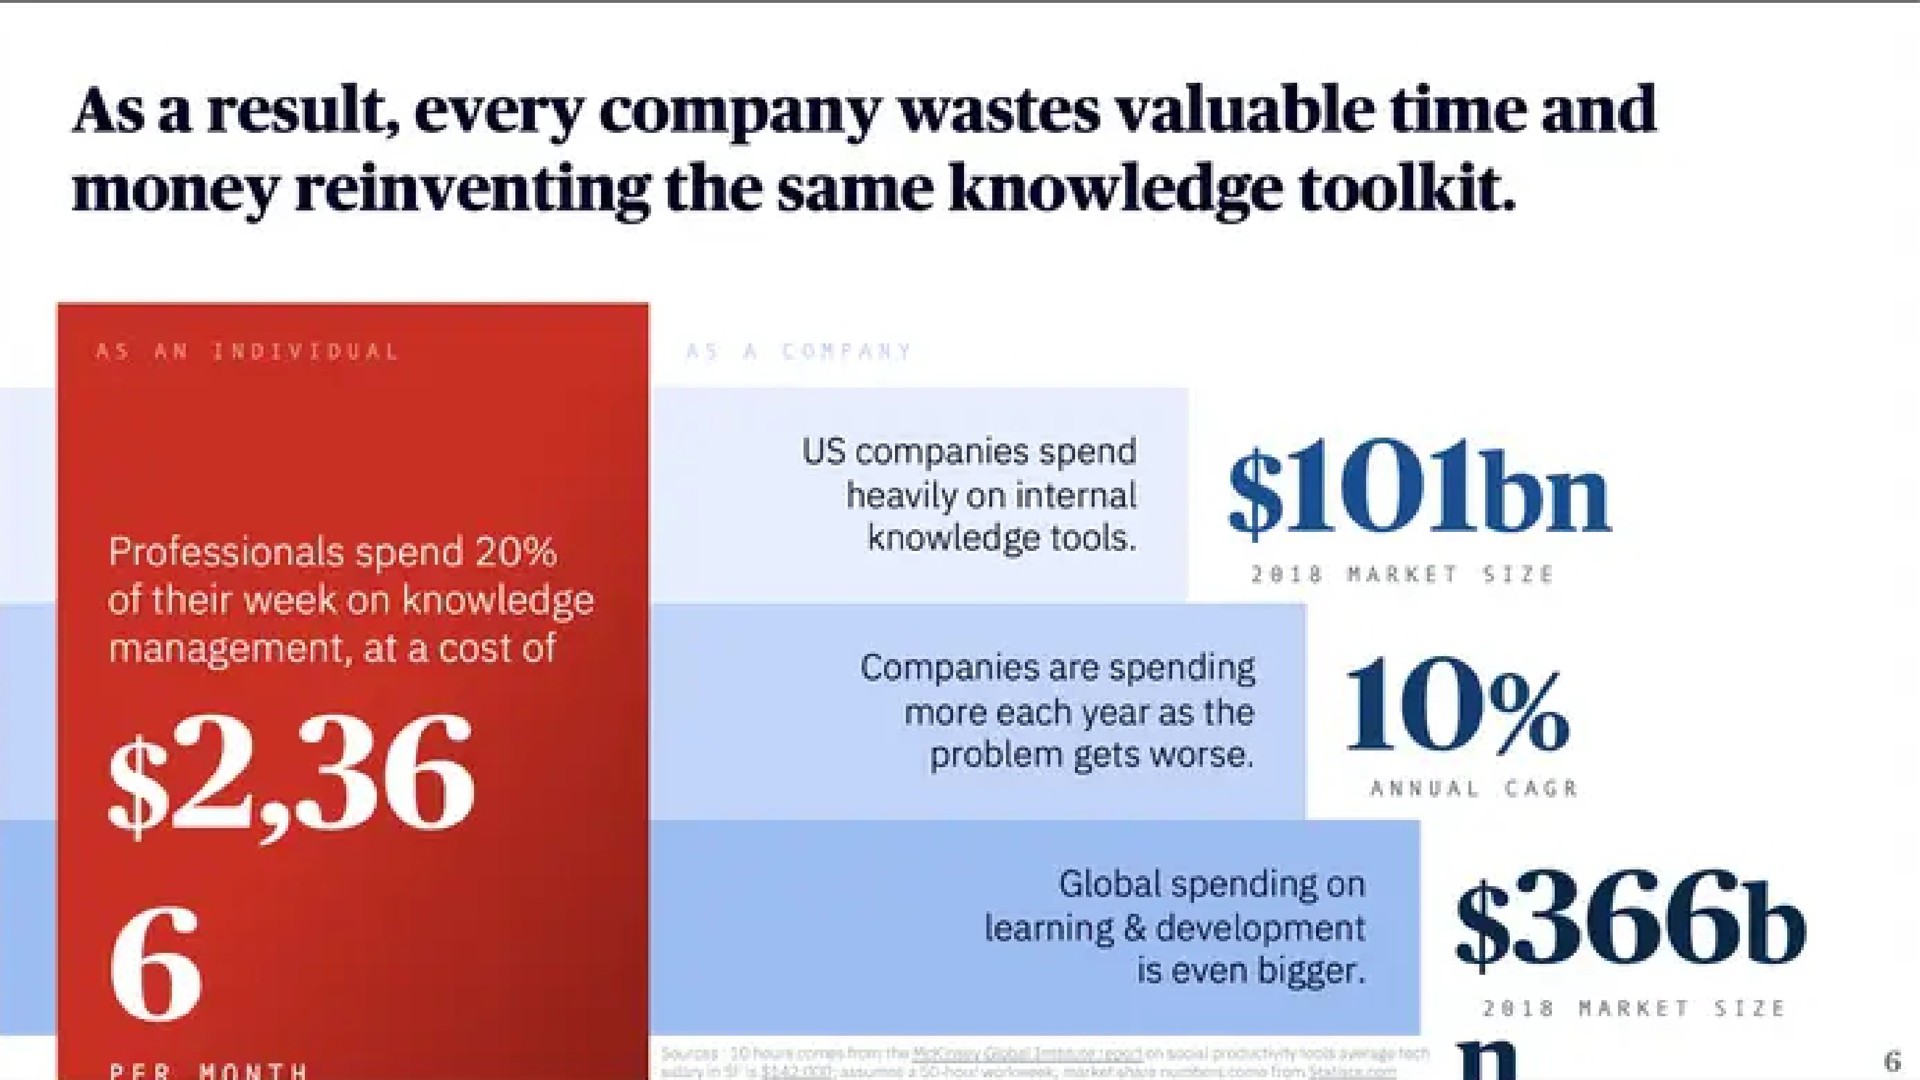 as every company wastes valuable time and money reinventing the same knowledge aching | Almanac